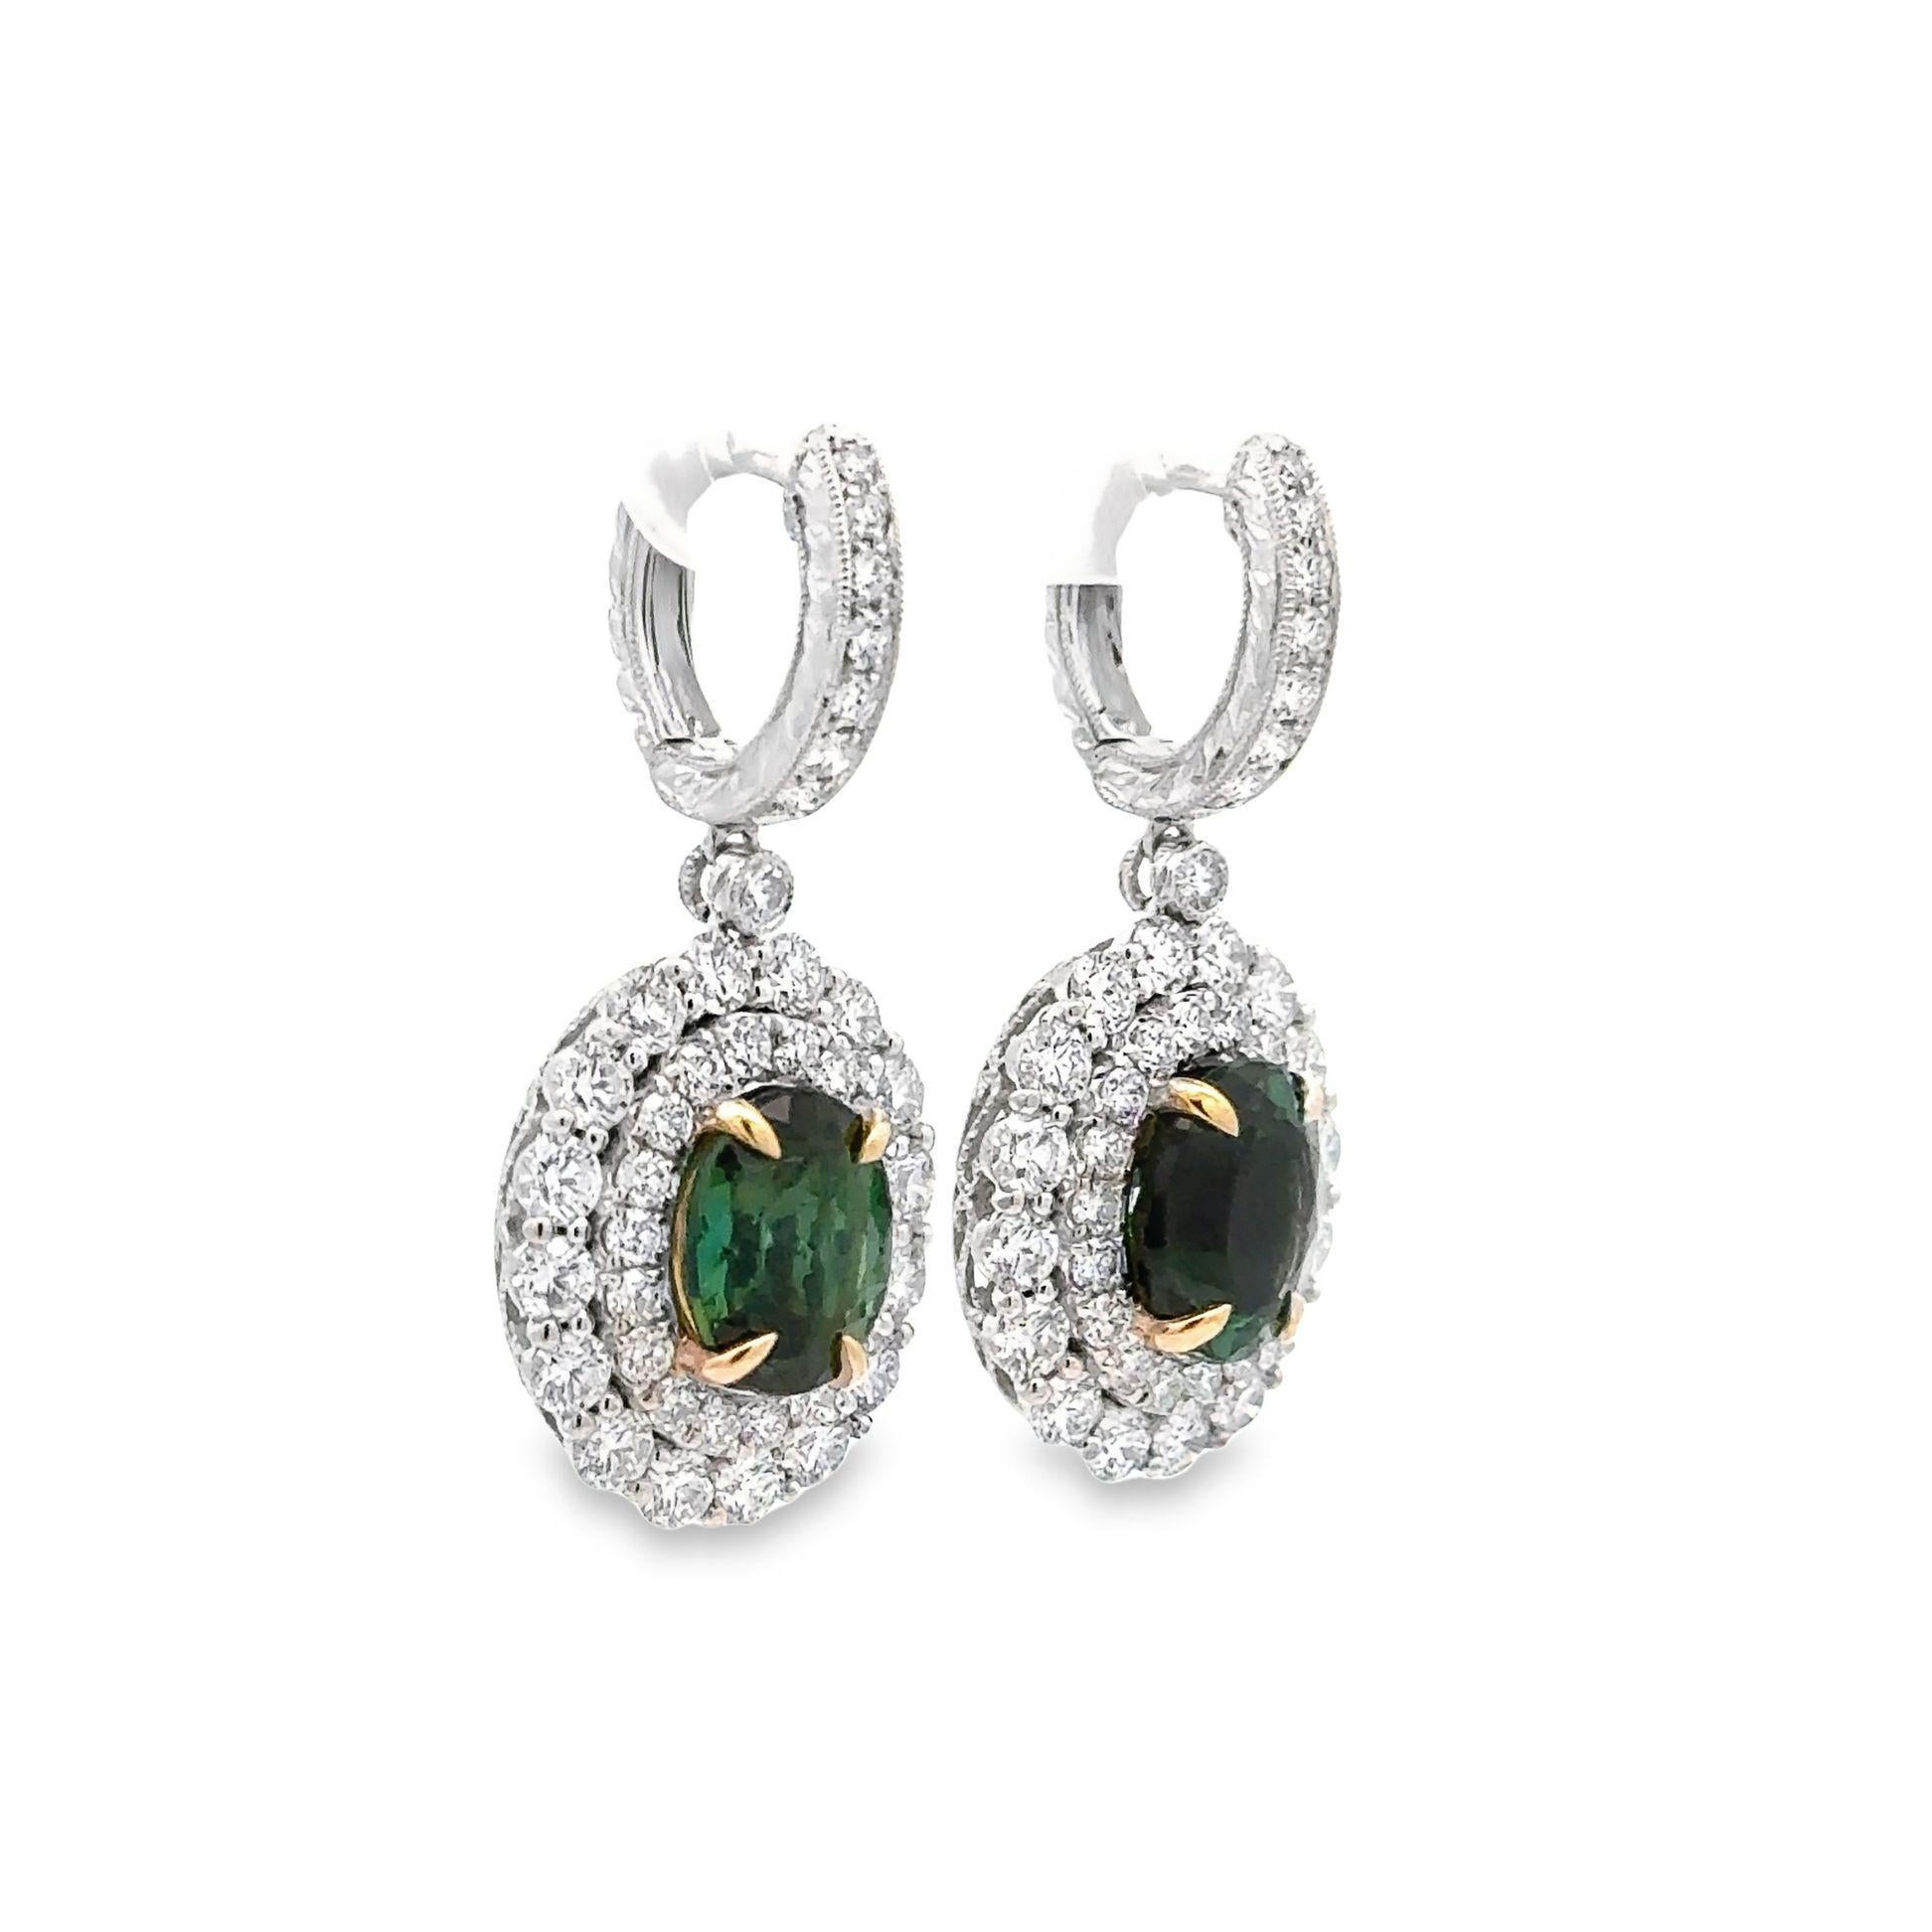 A pair of chic and elegant 18k white gold earrings featuring a pair of matching tourmalines. The tourmalines weigh a total of 4.90 carats and have a rich velvety forest green color with a hint of blue in it making it a unique and special color. They